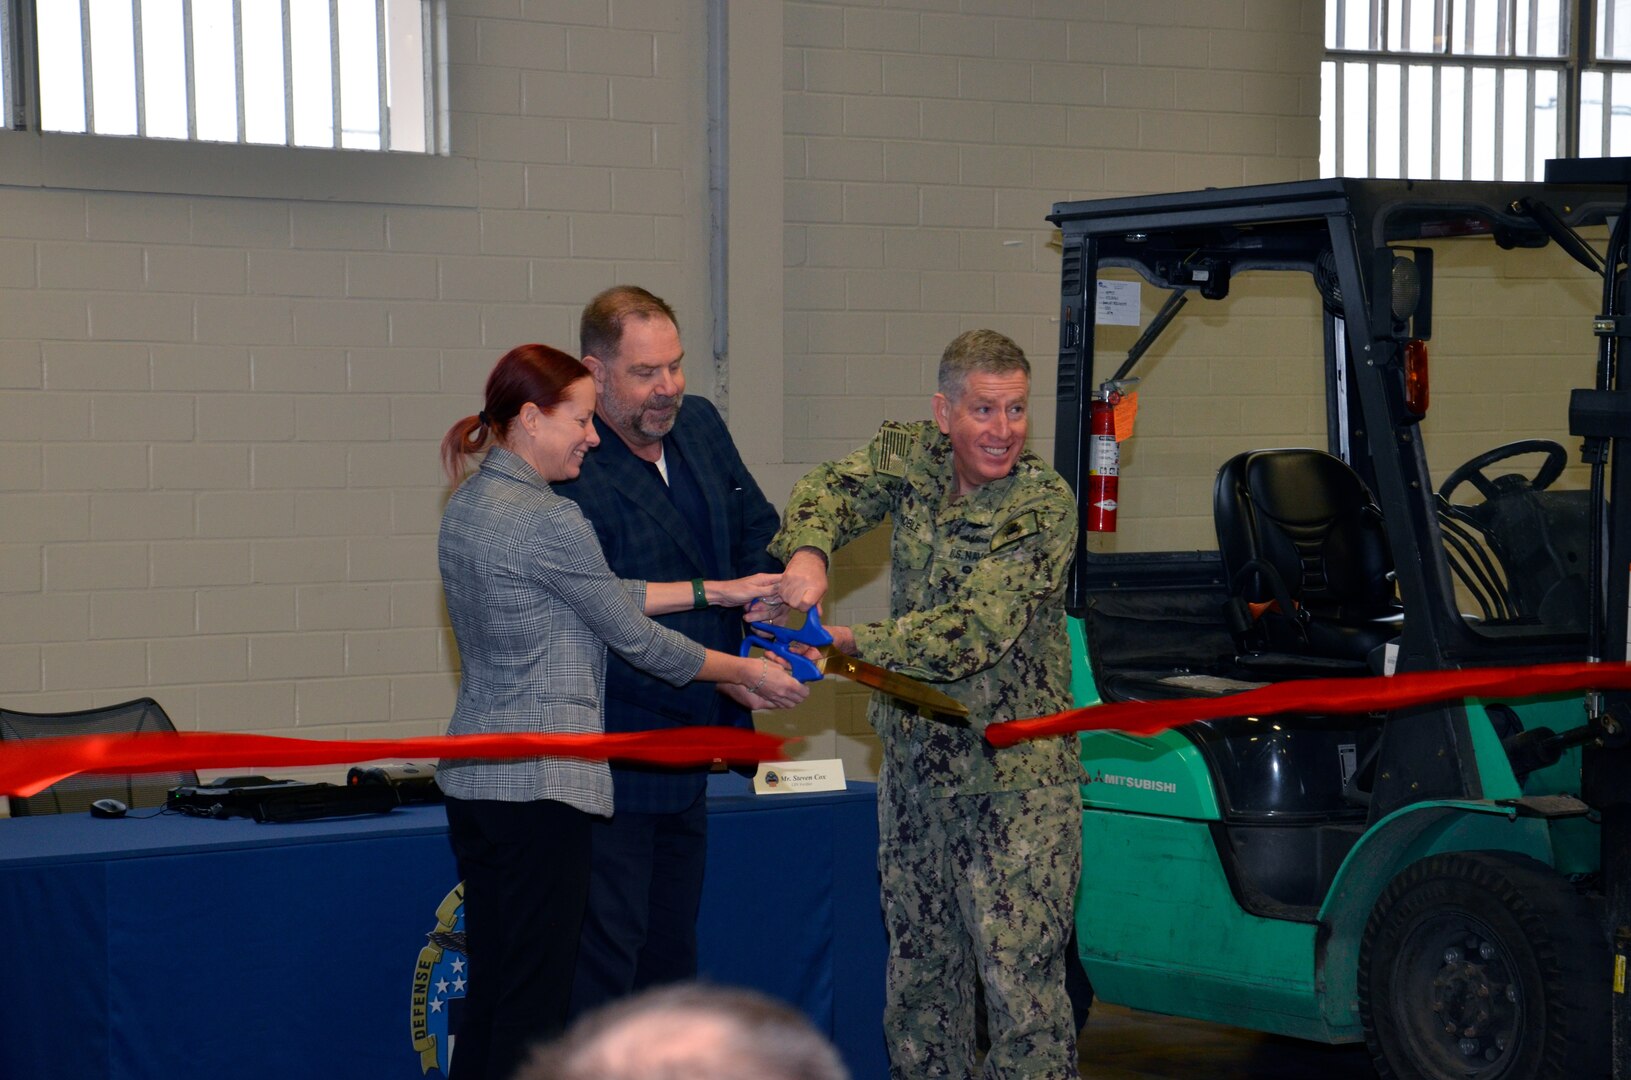 Three people cutting ribbon with ceremonial scissors.